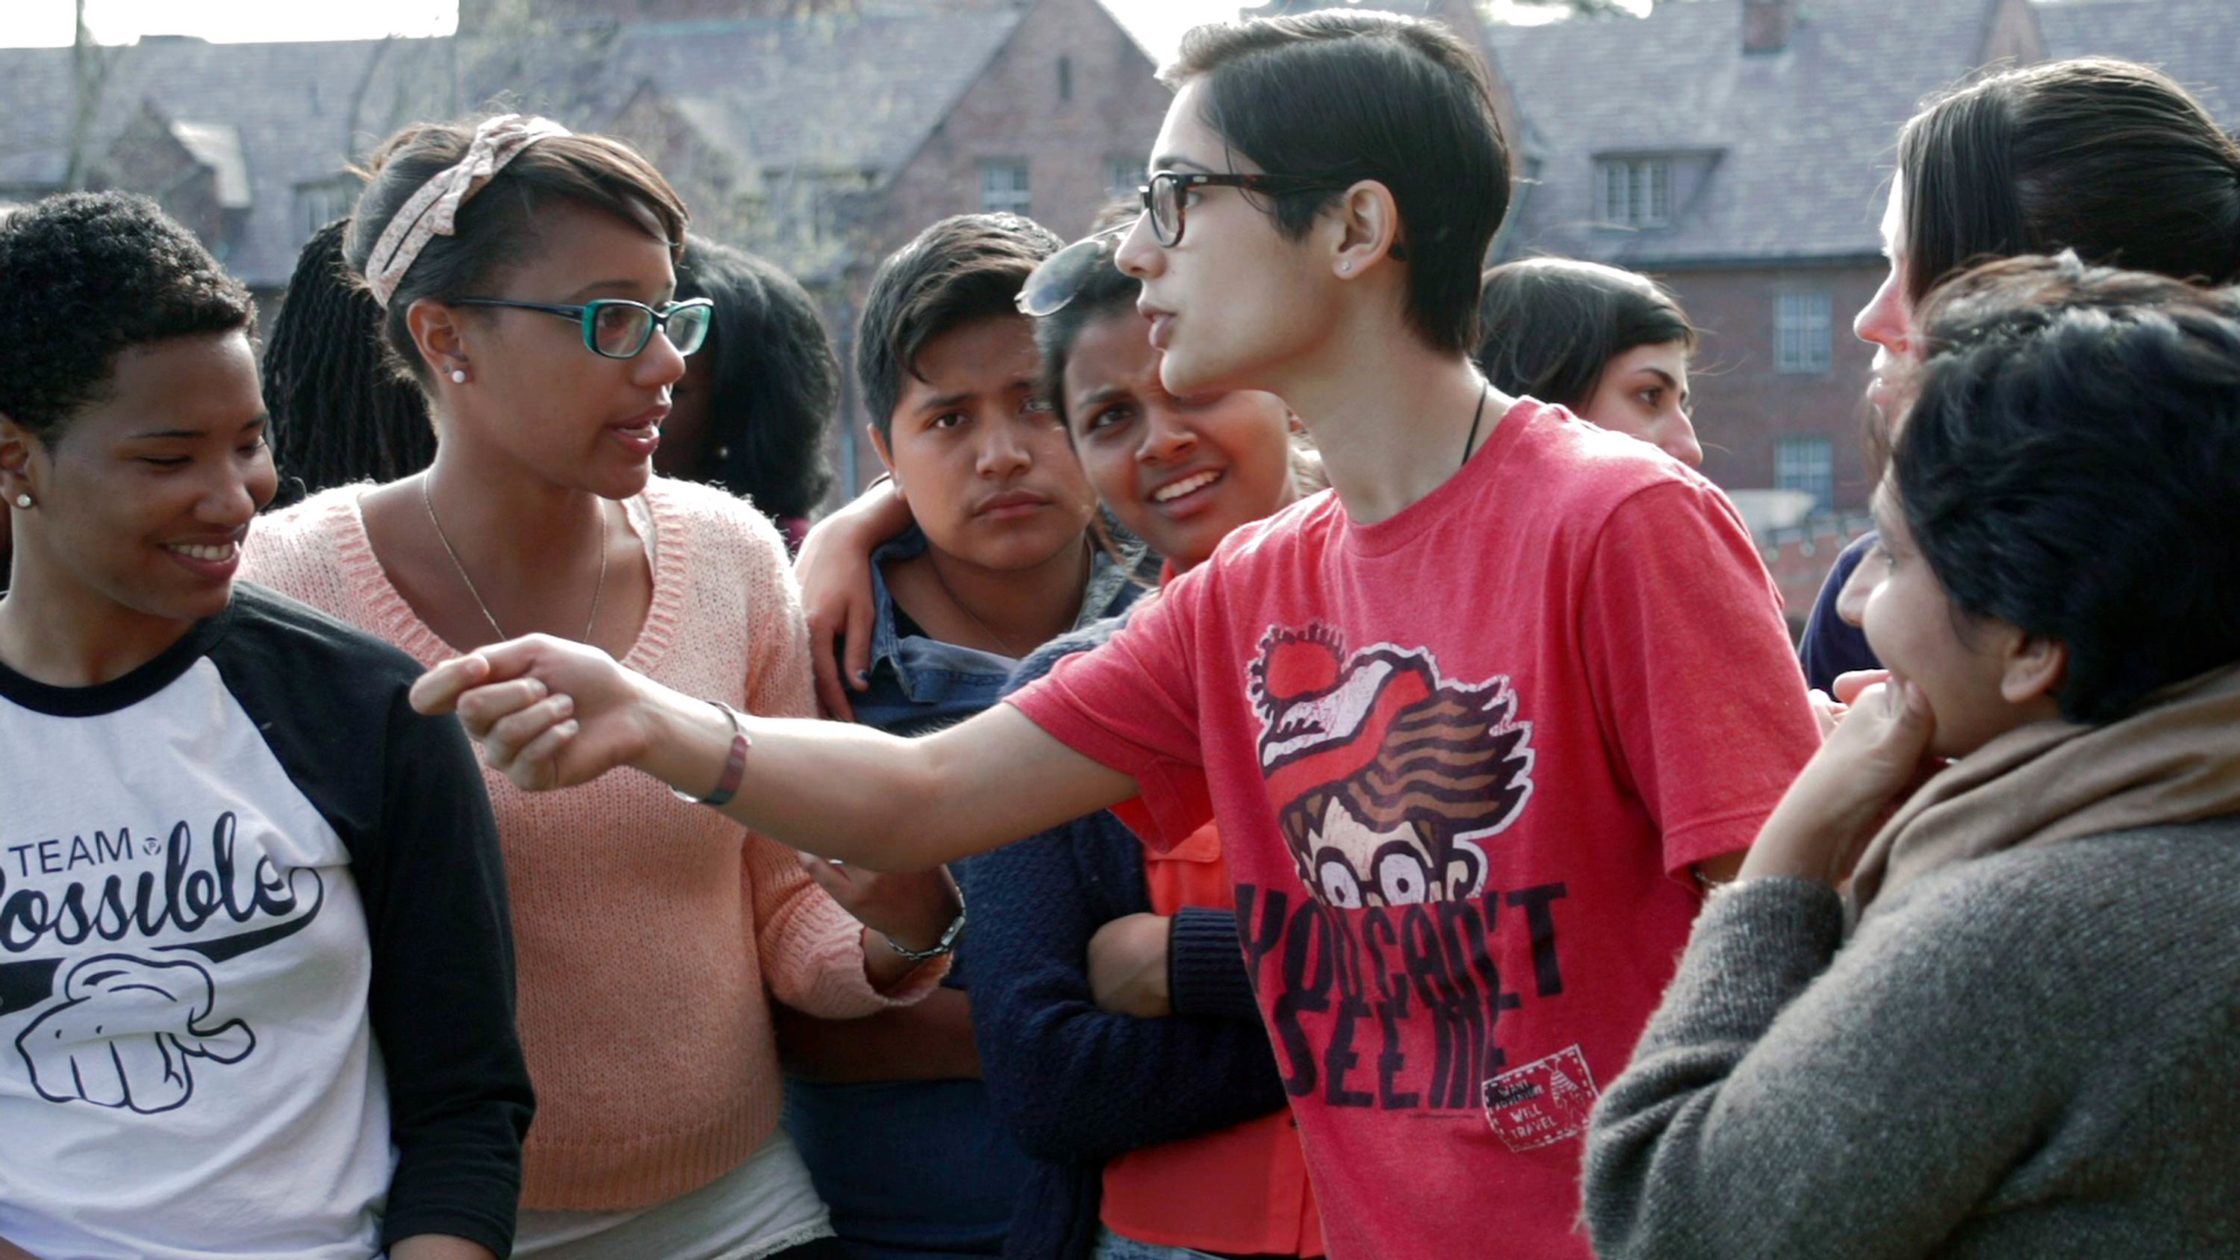 a young person wearing a Where's Waldo tshirt holds a microphone out to a group of teens